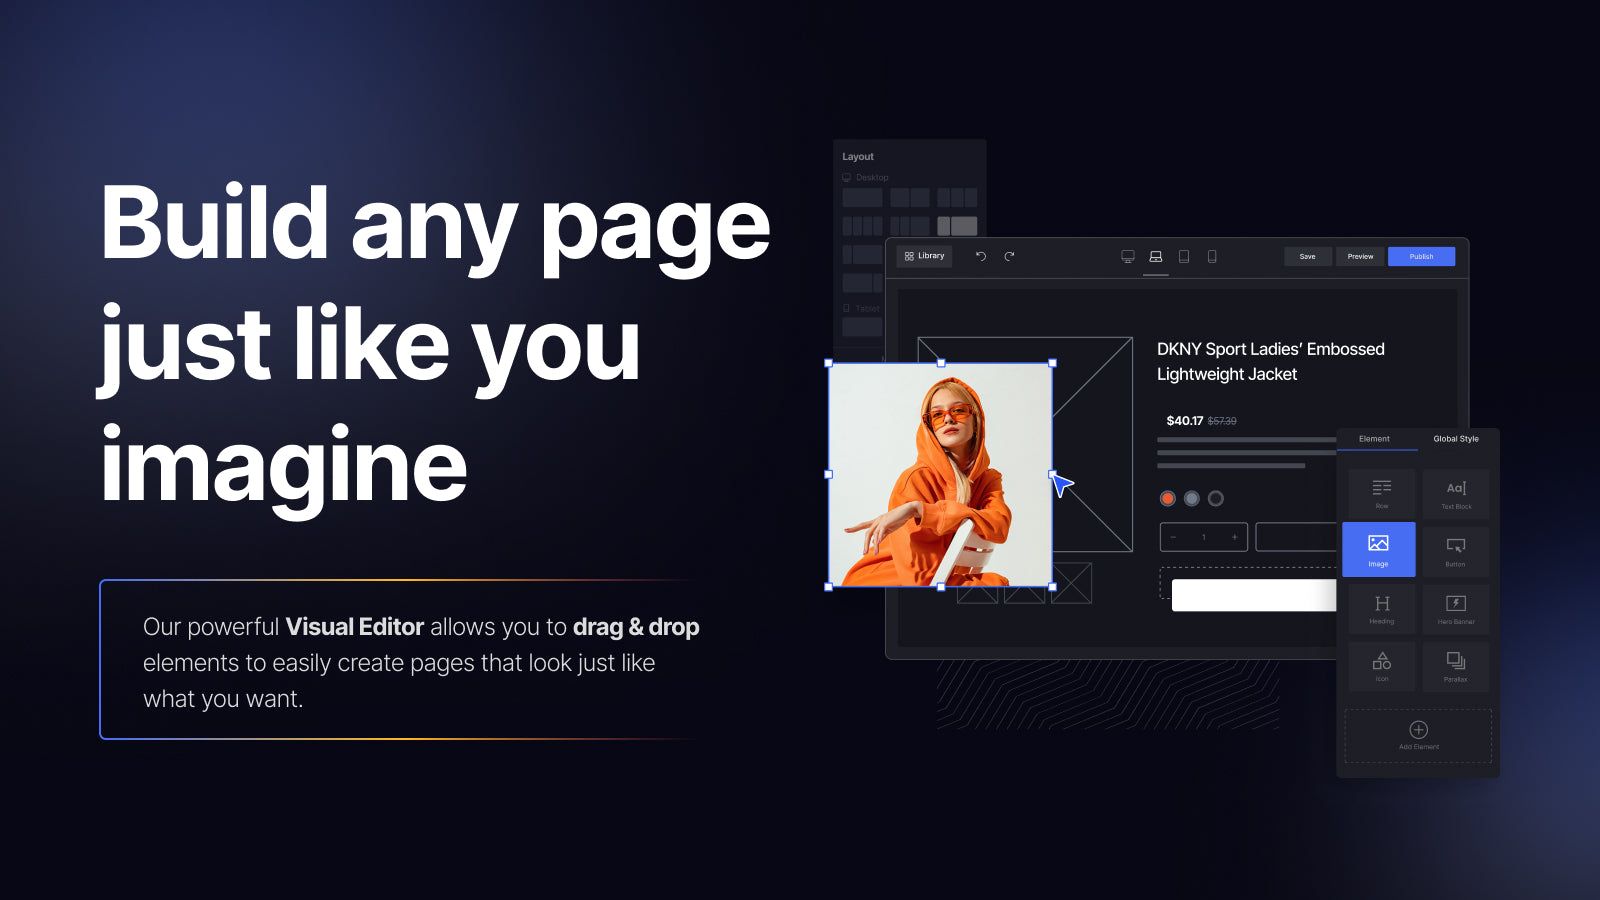 Build any page just like you imagine